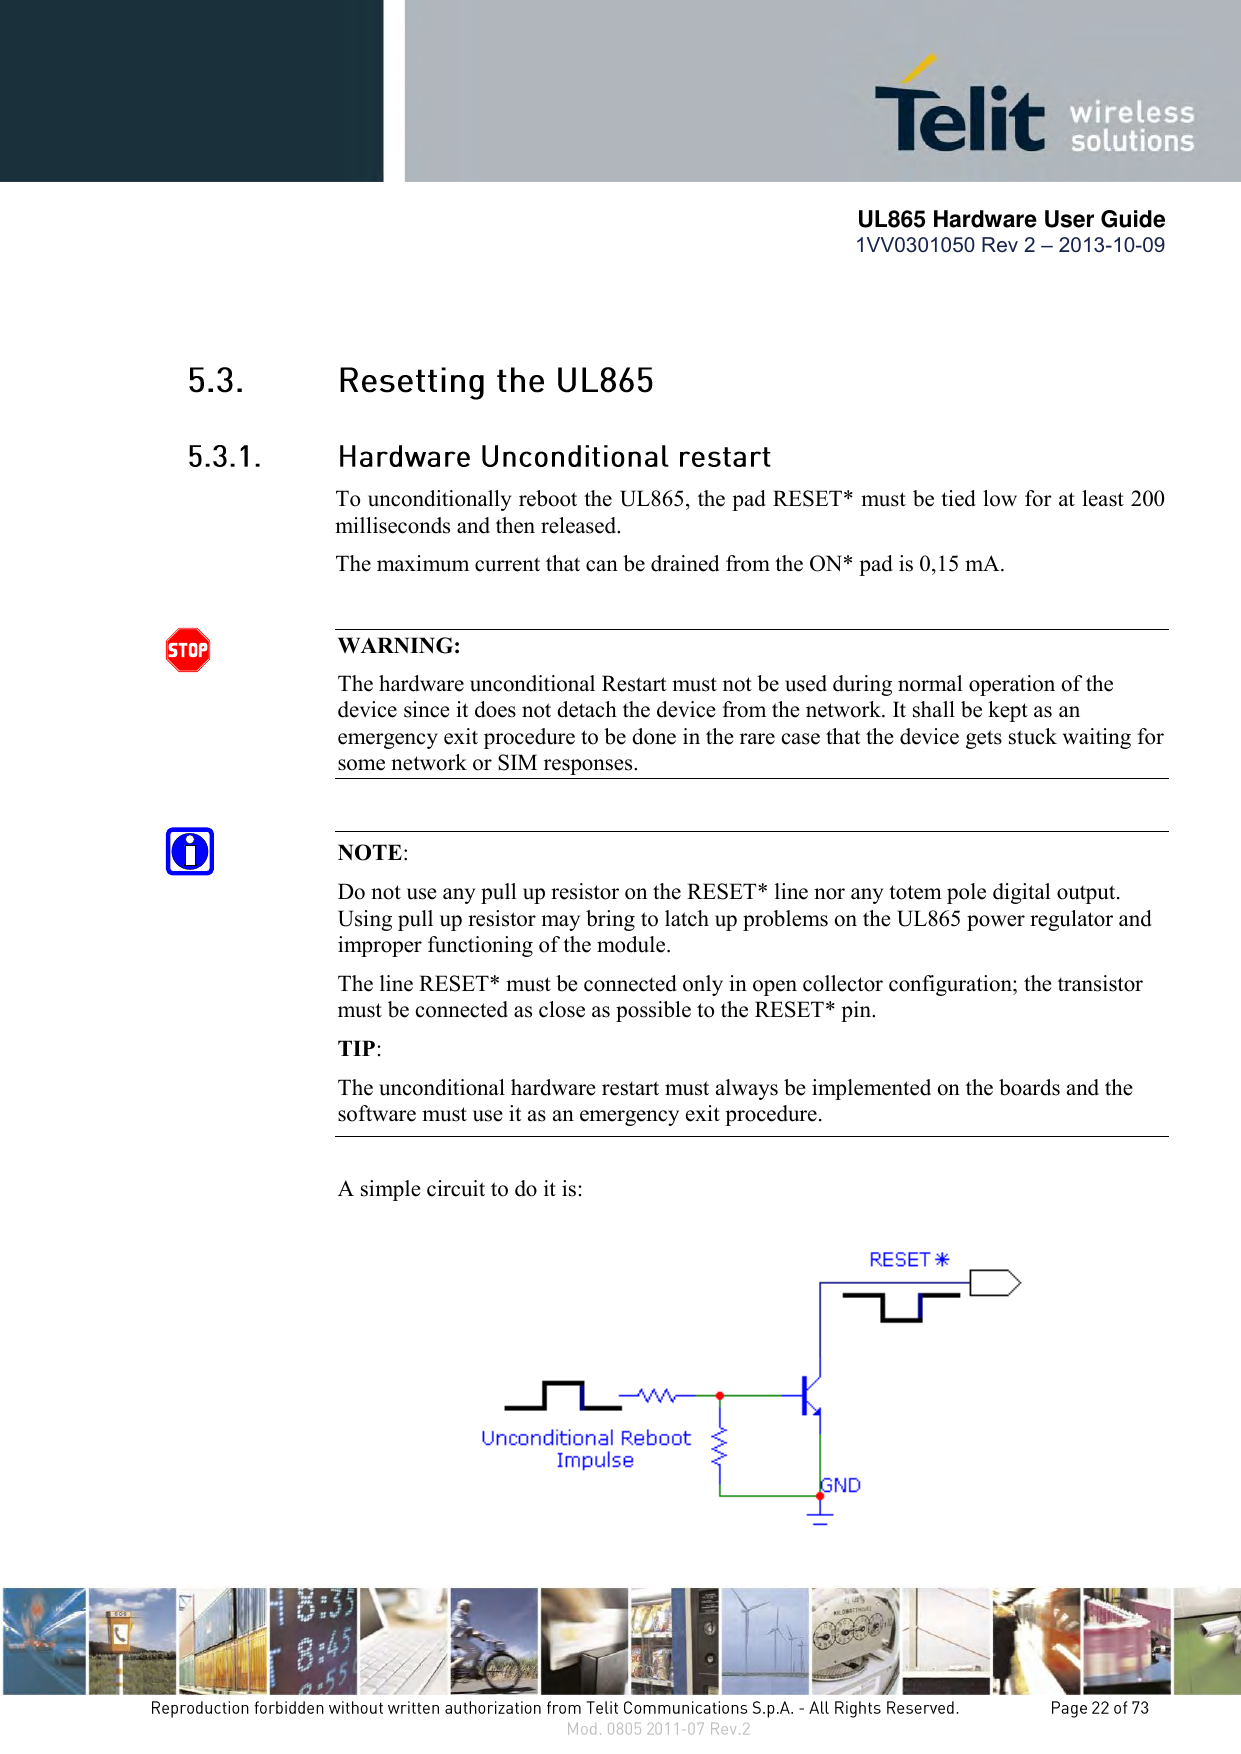       UL865 Hardware User Guide 1VV0301050 Rev 2 – 2013-10-09     To unconditionally reboot the UL865, the pad RESET* must be tied low for at least 200 milliseconds and then released. The maximum current that can be drained from the ON* pad is 0,15 mA.  WARNING: The hardware unconditional Restart must not be used during normal operation of the device since it does not detach the device from the network. It shall be kept as an emergency exit procedure to be done in the rare case that the device gets stuck waiting for some network or SIM responses.     NOTE:  Do not use any pull up resistor on the RESET* line nor any totem pole digital output. Using pull up resistor may bring to latch up problems on the UL865 power regulator and improper functioning of the module.  The line RESET* must be connected only in open collector configuration; the transistor must be connected as close as possible to the RESET* pin. TIP: The unconditional hardware restart must always be implemented on the boards and the software must use it as an emergency exit procedure.  A simple circuit to do it is:   